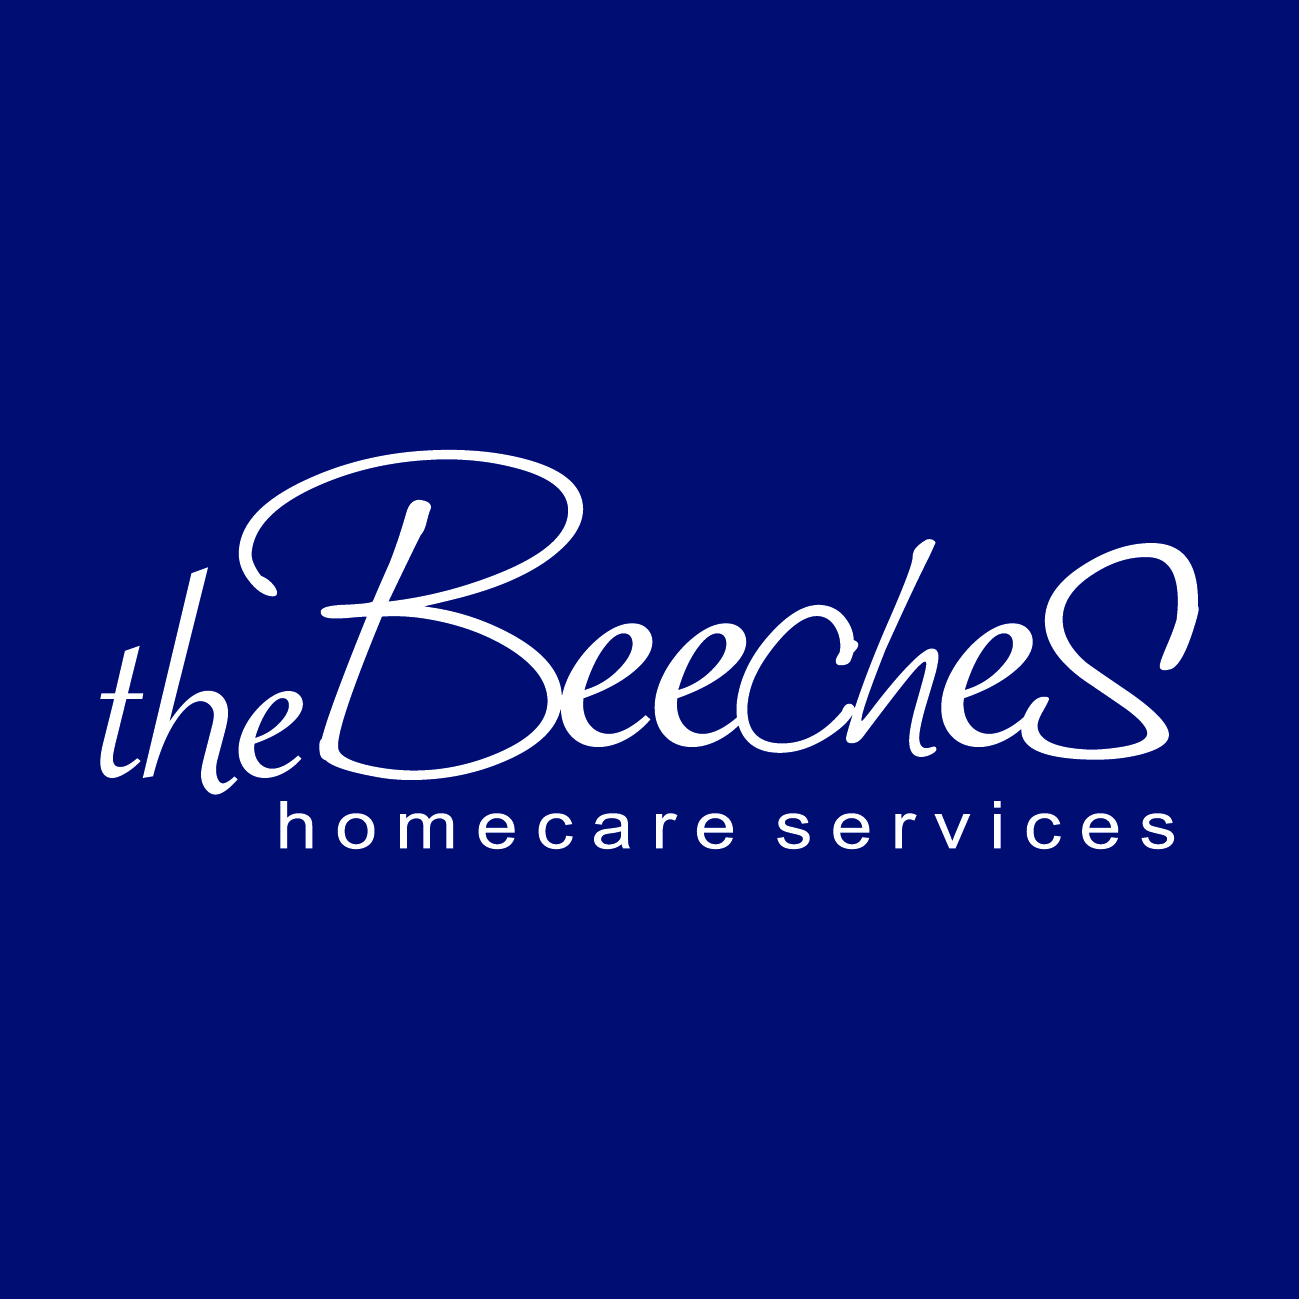 The Beeches Homecare Services